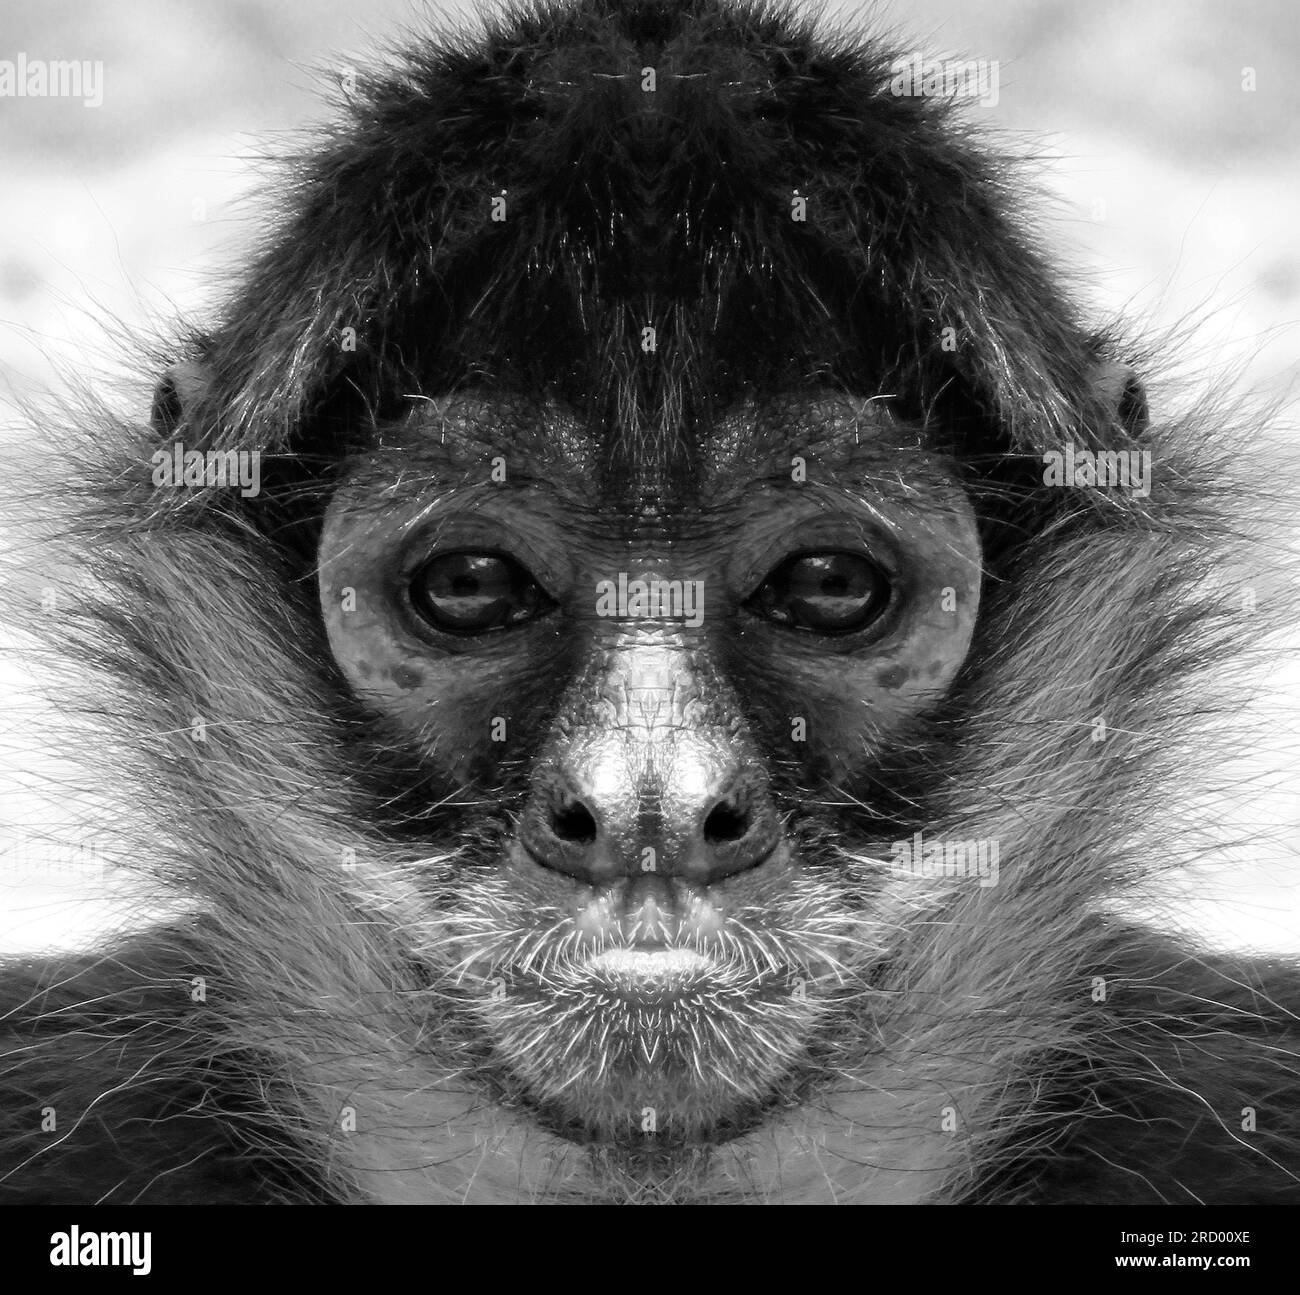 A beautiful black and white portrait of a monkey at close range that looks at the camera. spider monkeys. Stock Photo